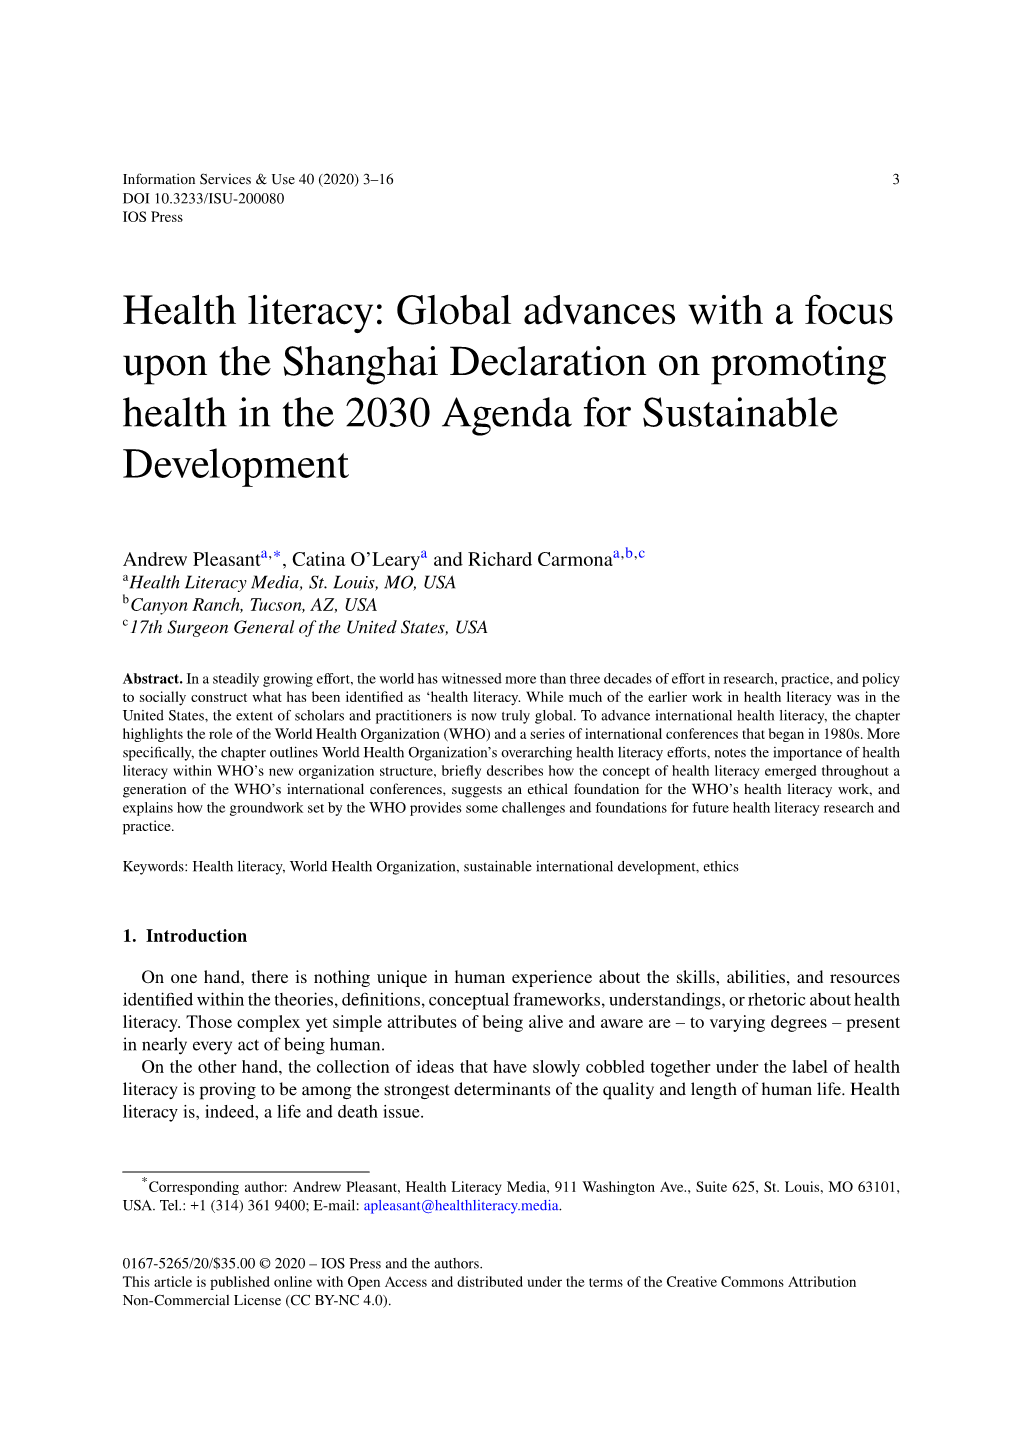 Health Literacy: Global Advances with a Focus Upon the Shanghai Declaration on Promoting Health in the 2030 Agenda for Sustainable Development